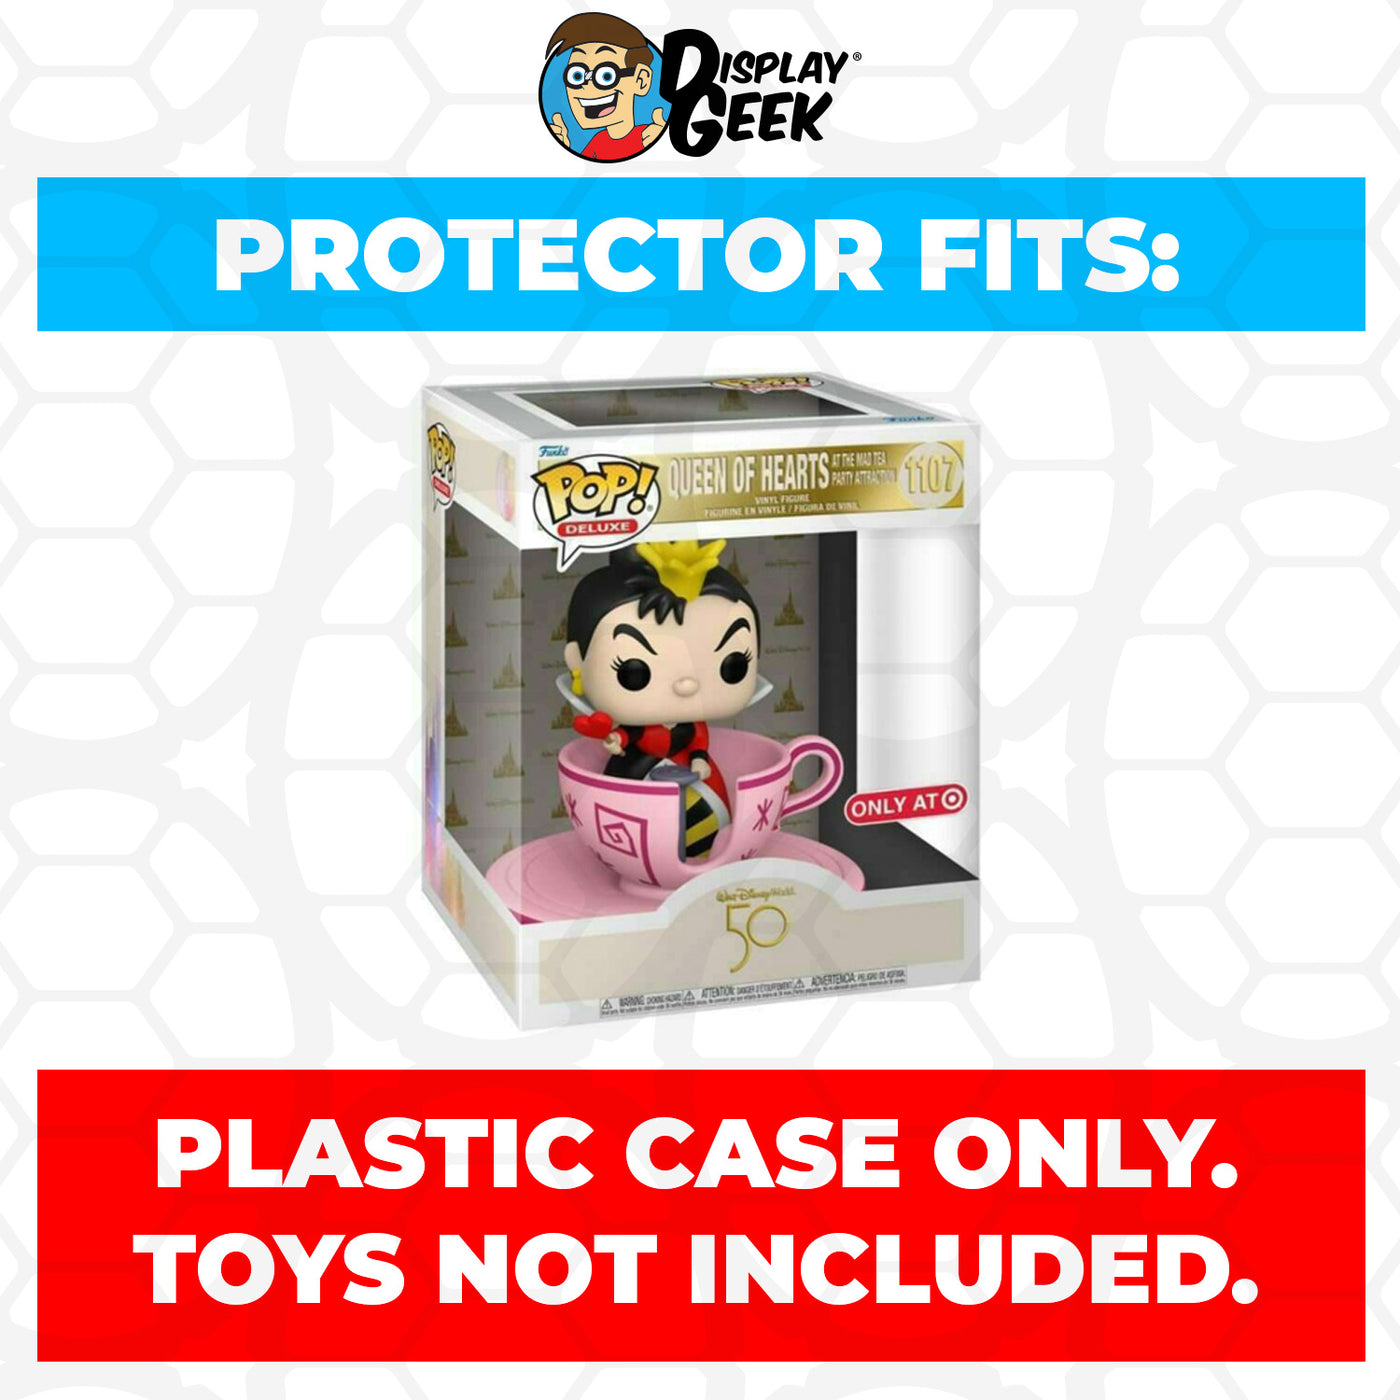 Pop Protector for Queen of Hearts at the Mad Tea Party #1107 Funko Pop Deluxe on The Protector Guide App by Display Geek